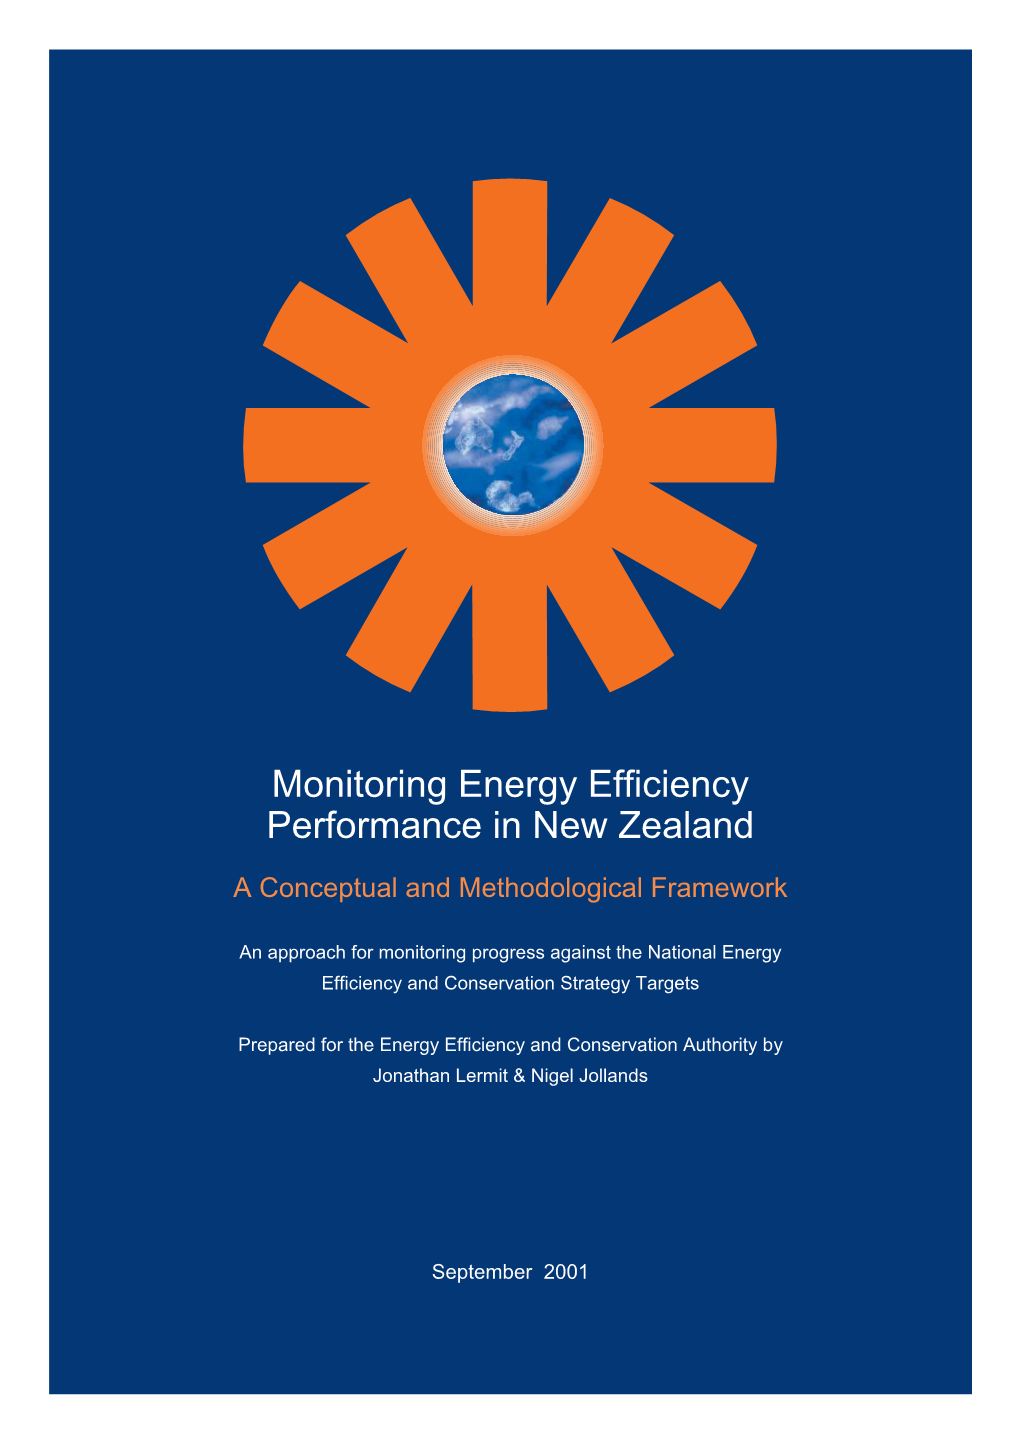 Monitoring Energy Efficiency Performance in New Zealand